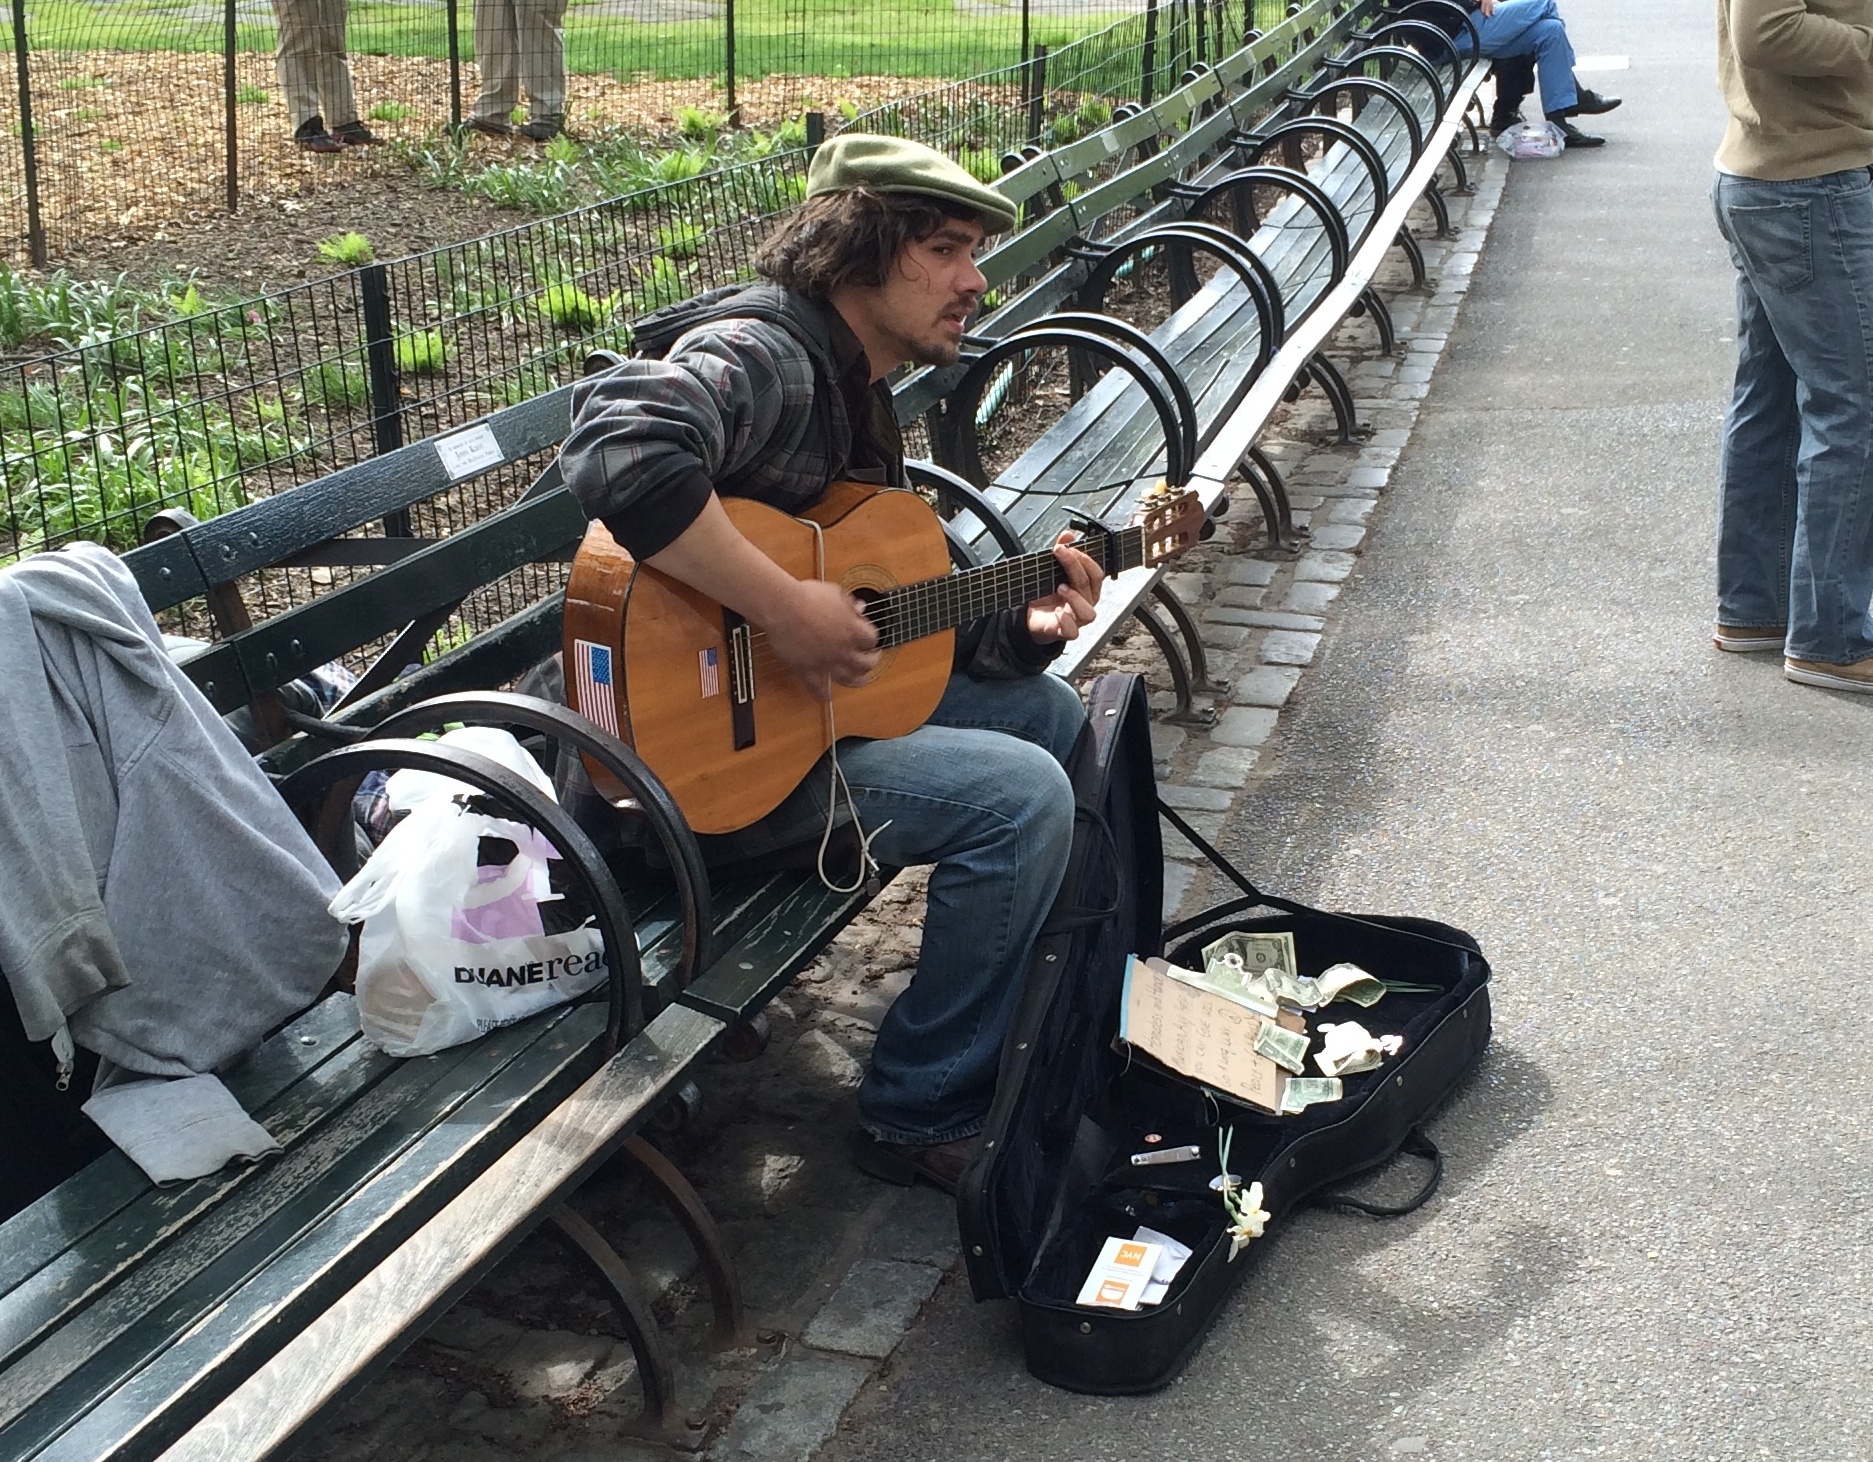 man playing guitar in park setting on bench